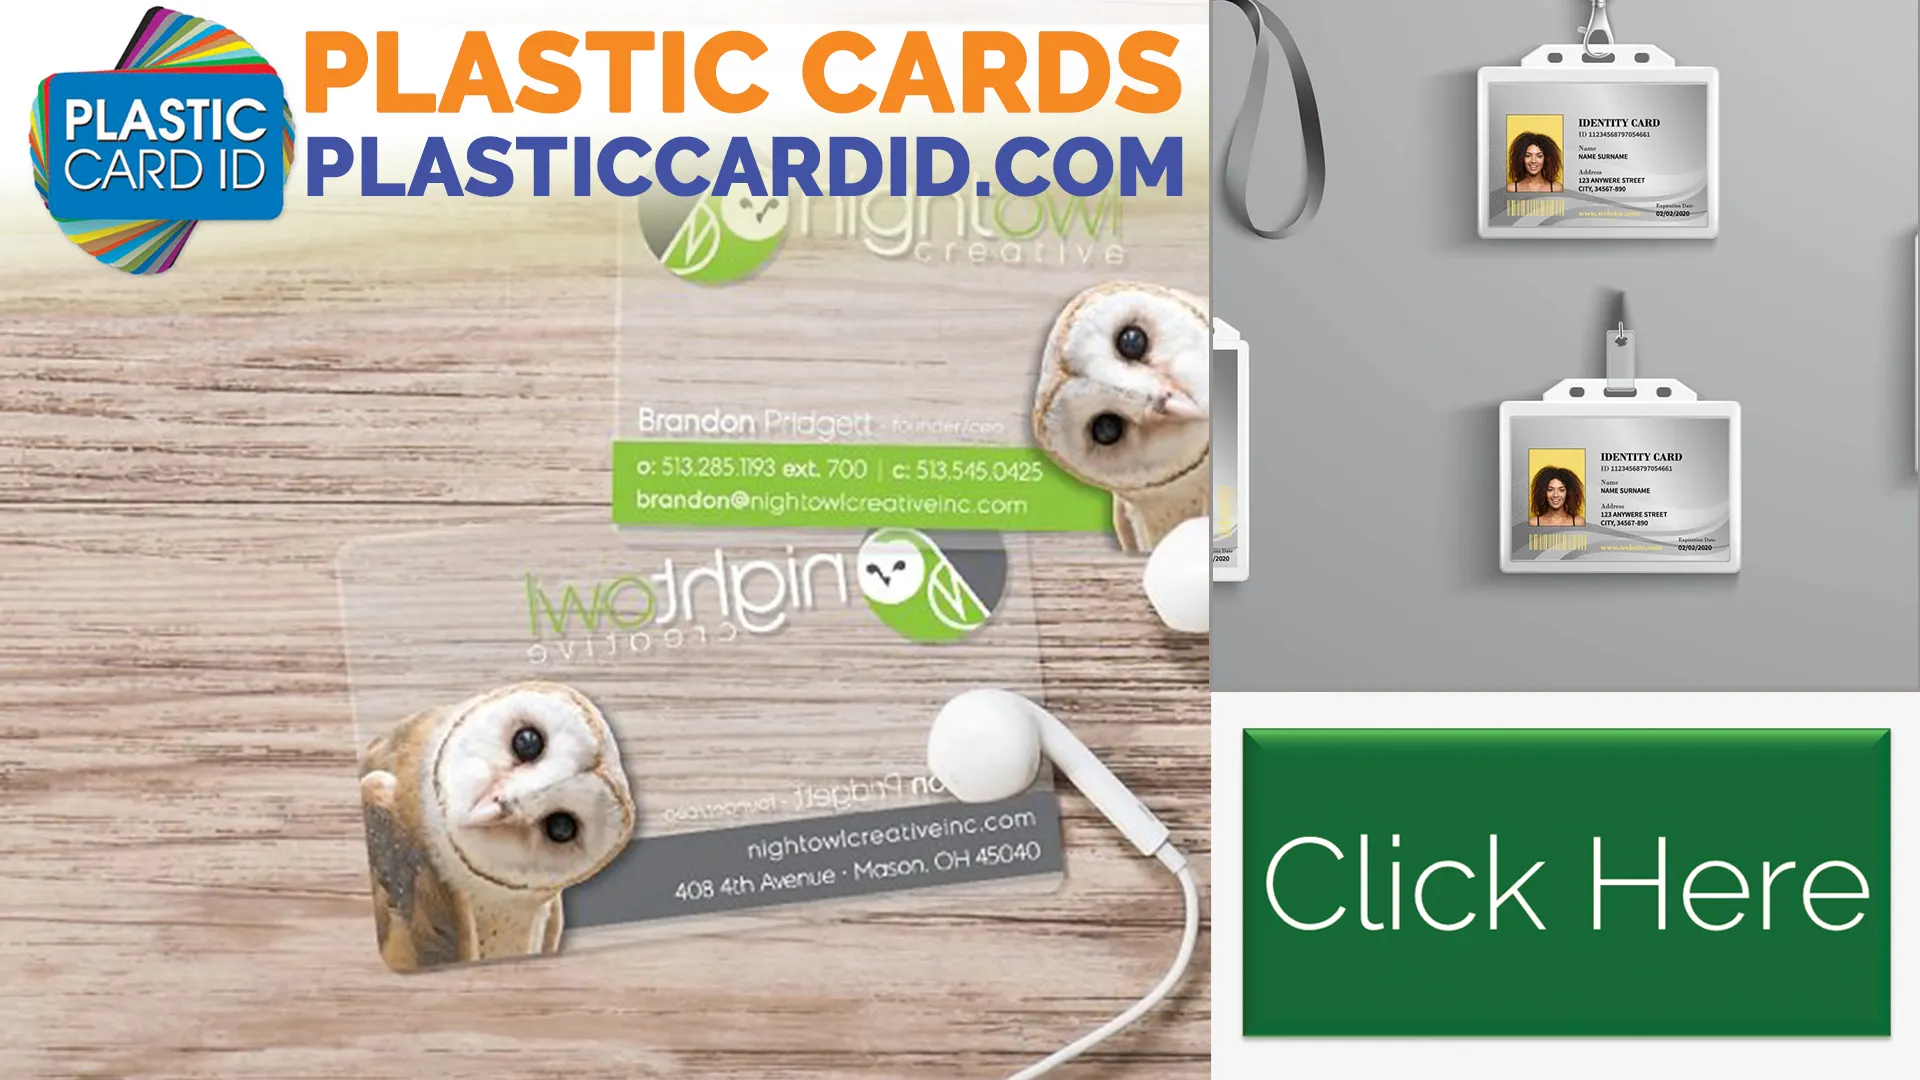 Building Enduring Customer Relationships with Plastic Cards